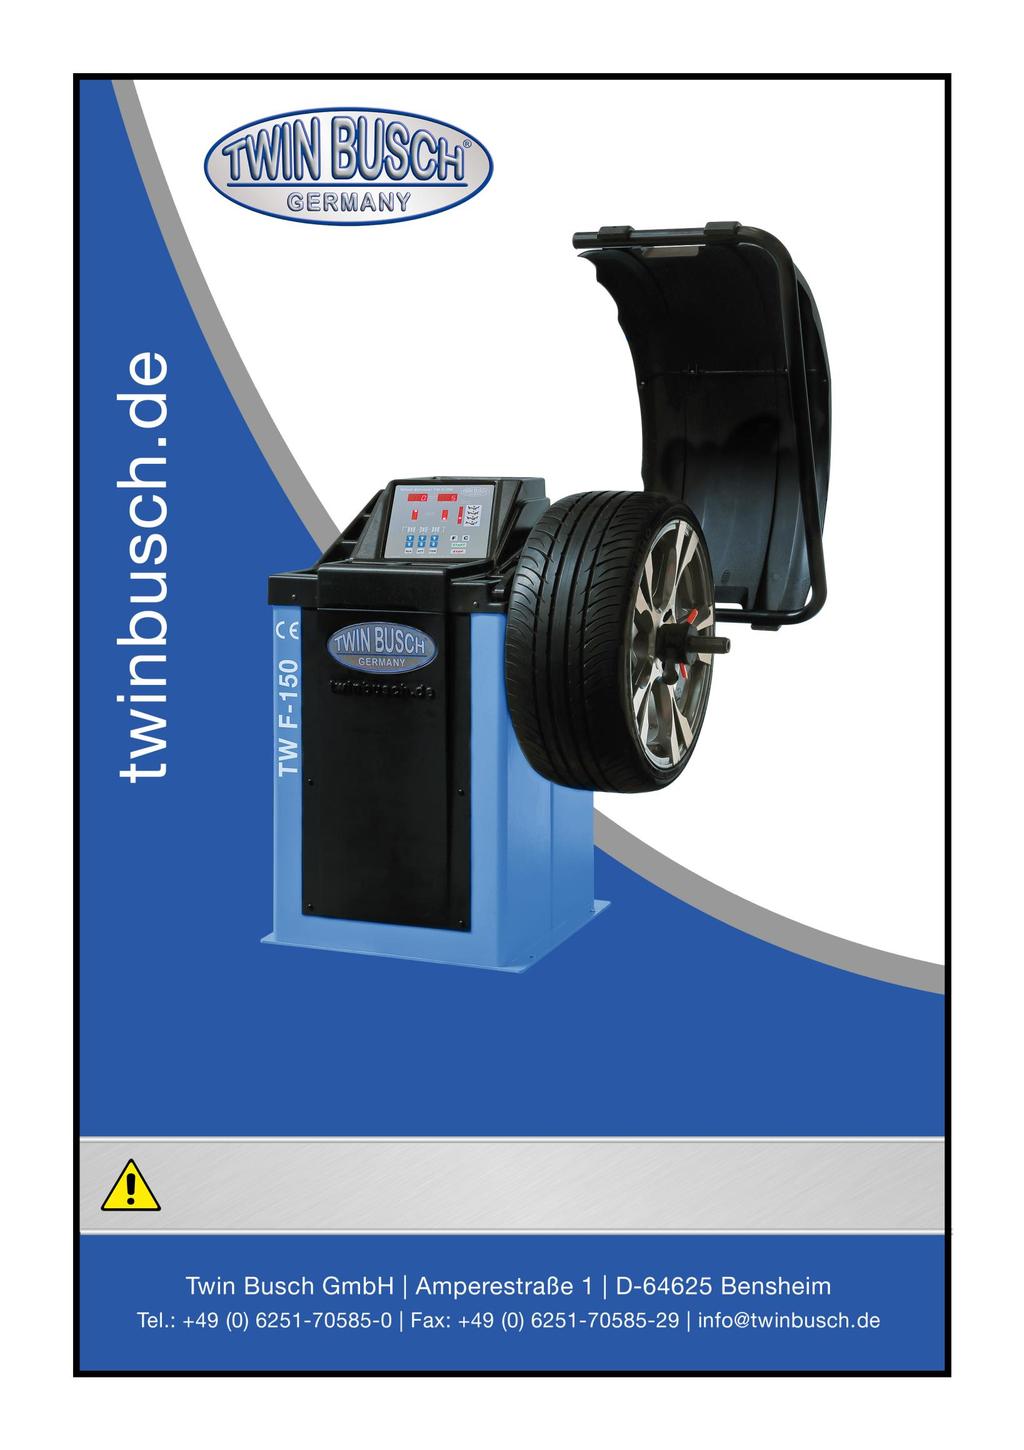 TW F - 150 Wheel balancing machine INSTALLATION, OPERATION AND MAINTENANCE MANUAL Read this entire